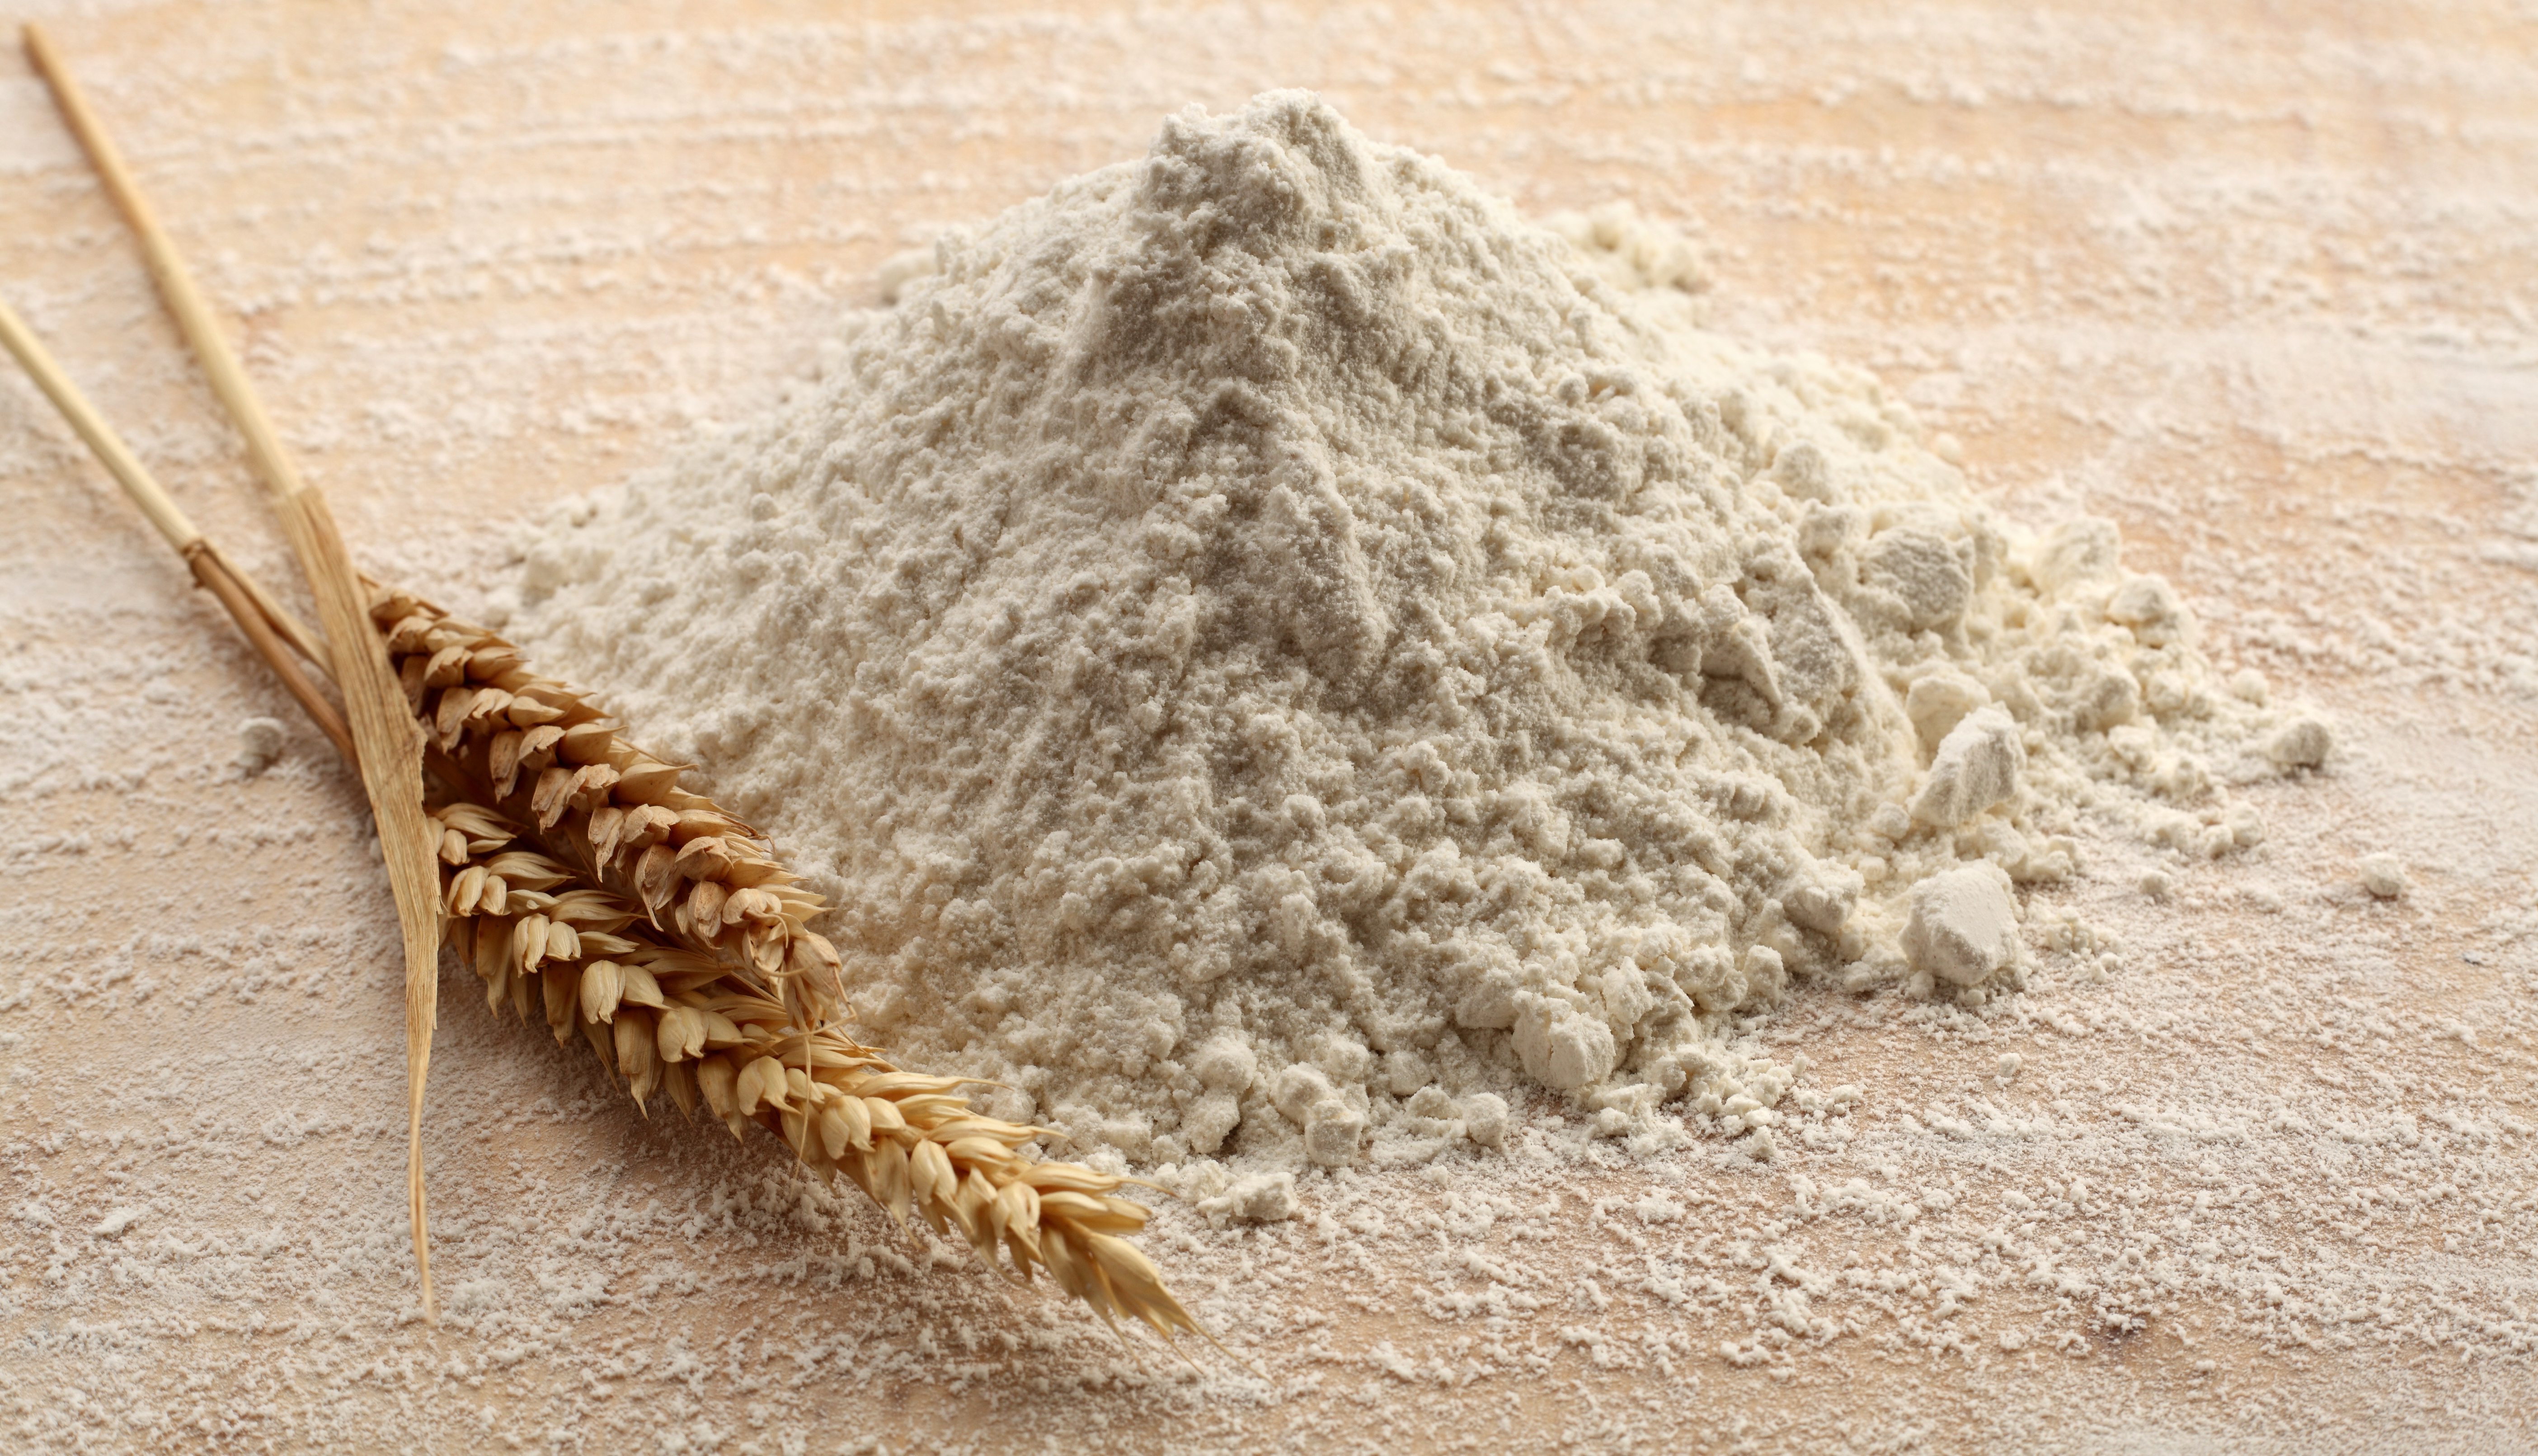 Two sprigs of wheat beside a small pile of flour.